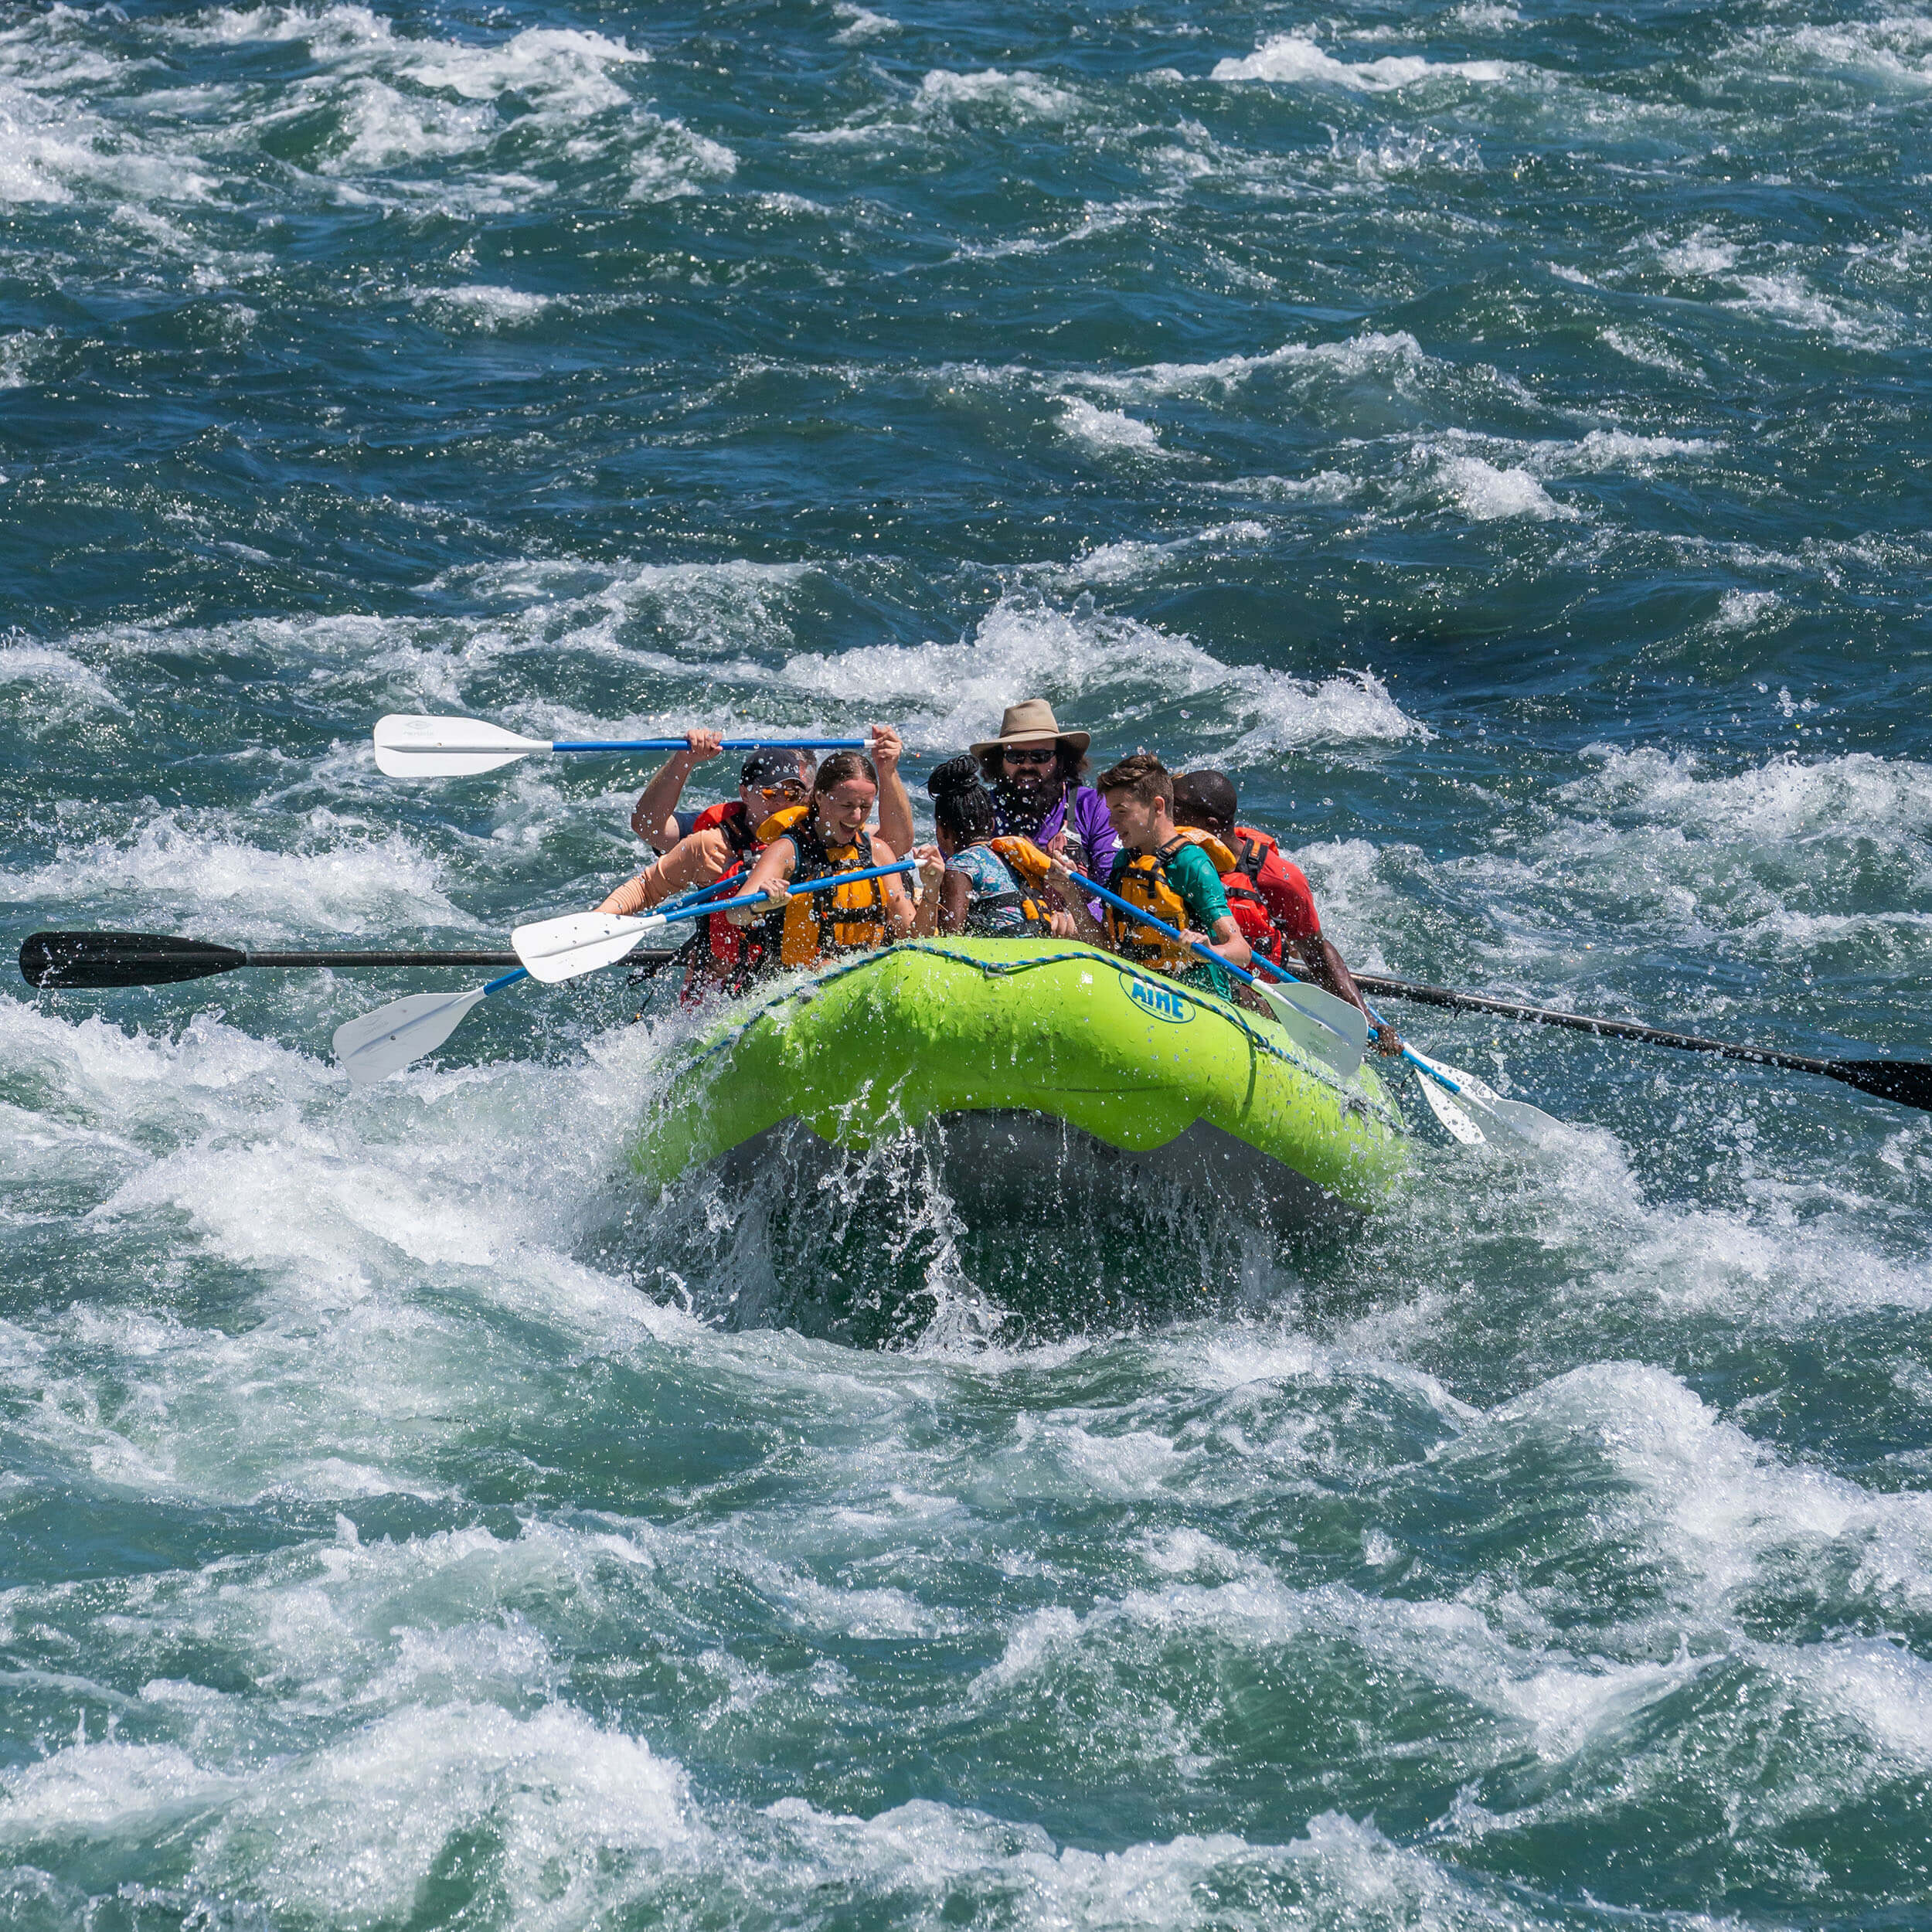 A group of children and adults in life jackets white water rafting with a guide in a neon green raft.